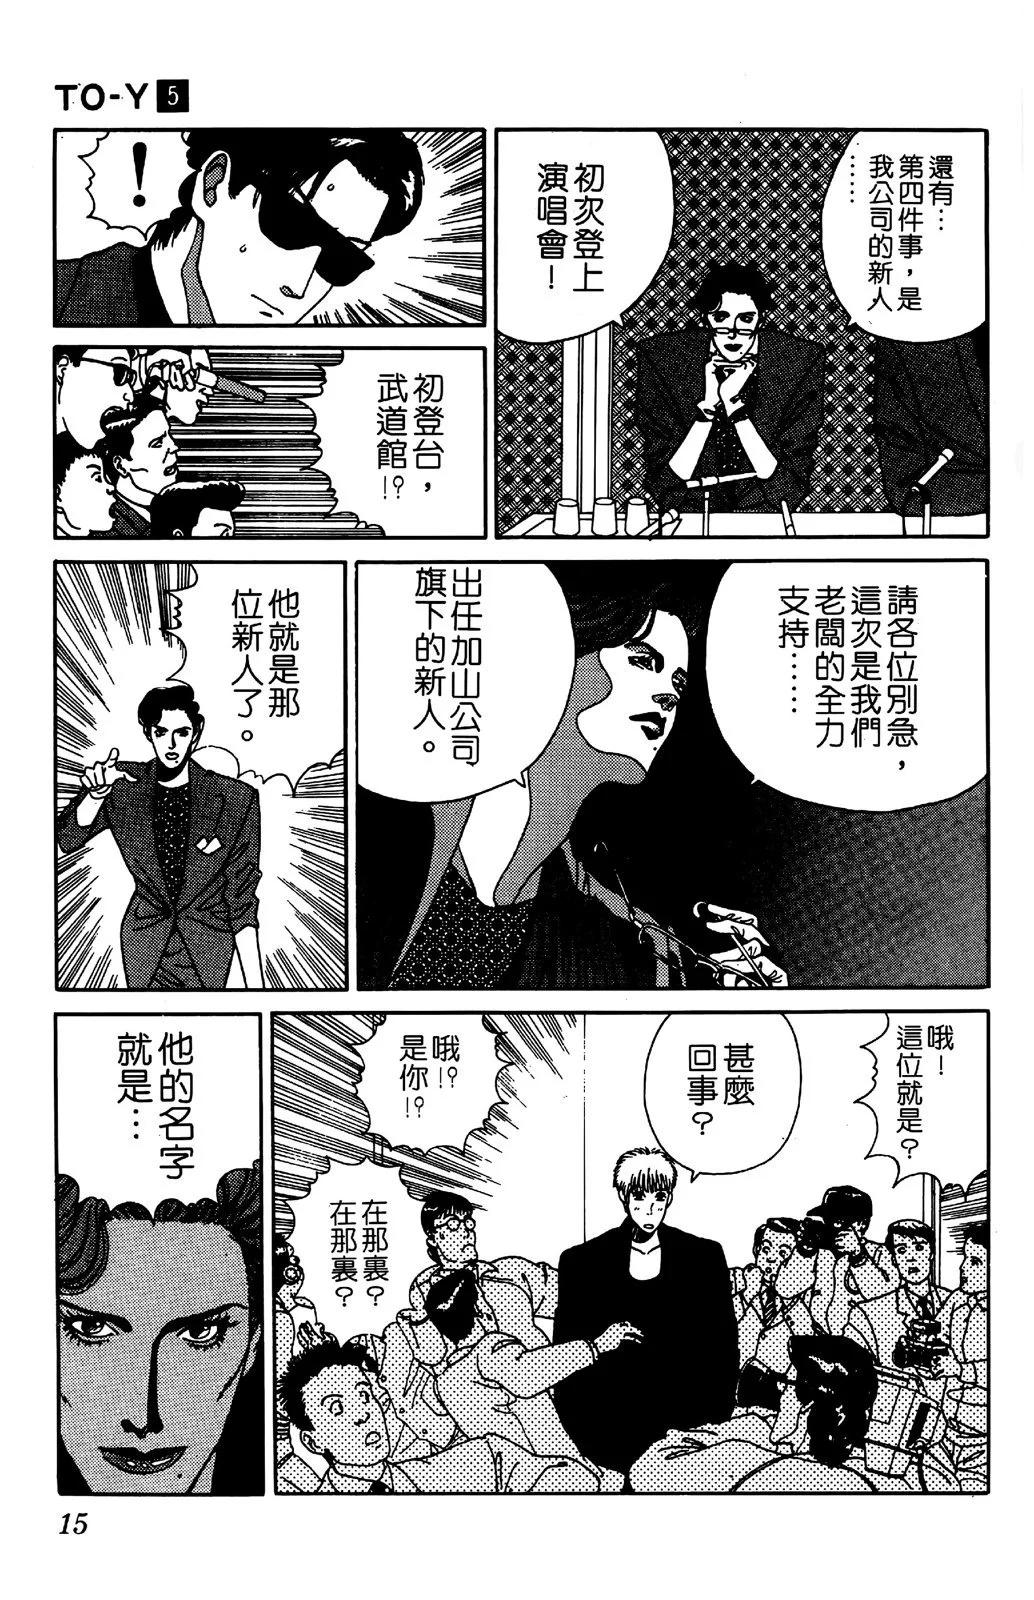 TO-Y - 第05卷(1/4) - 2